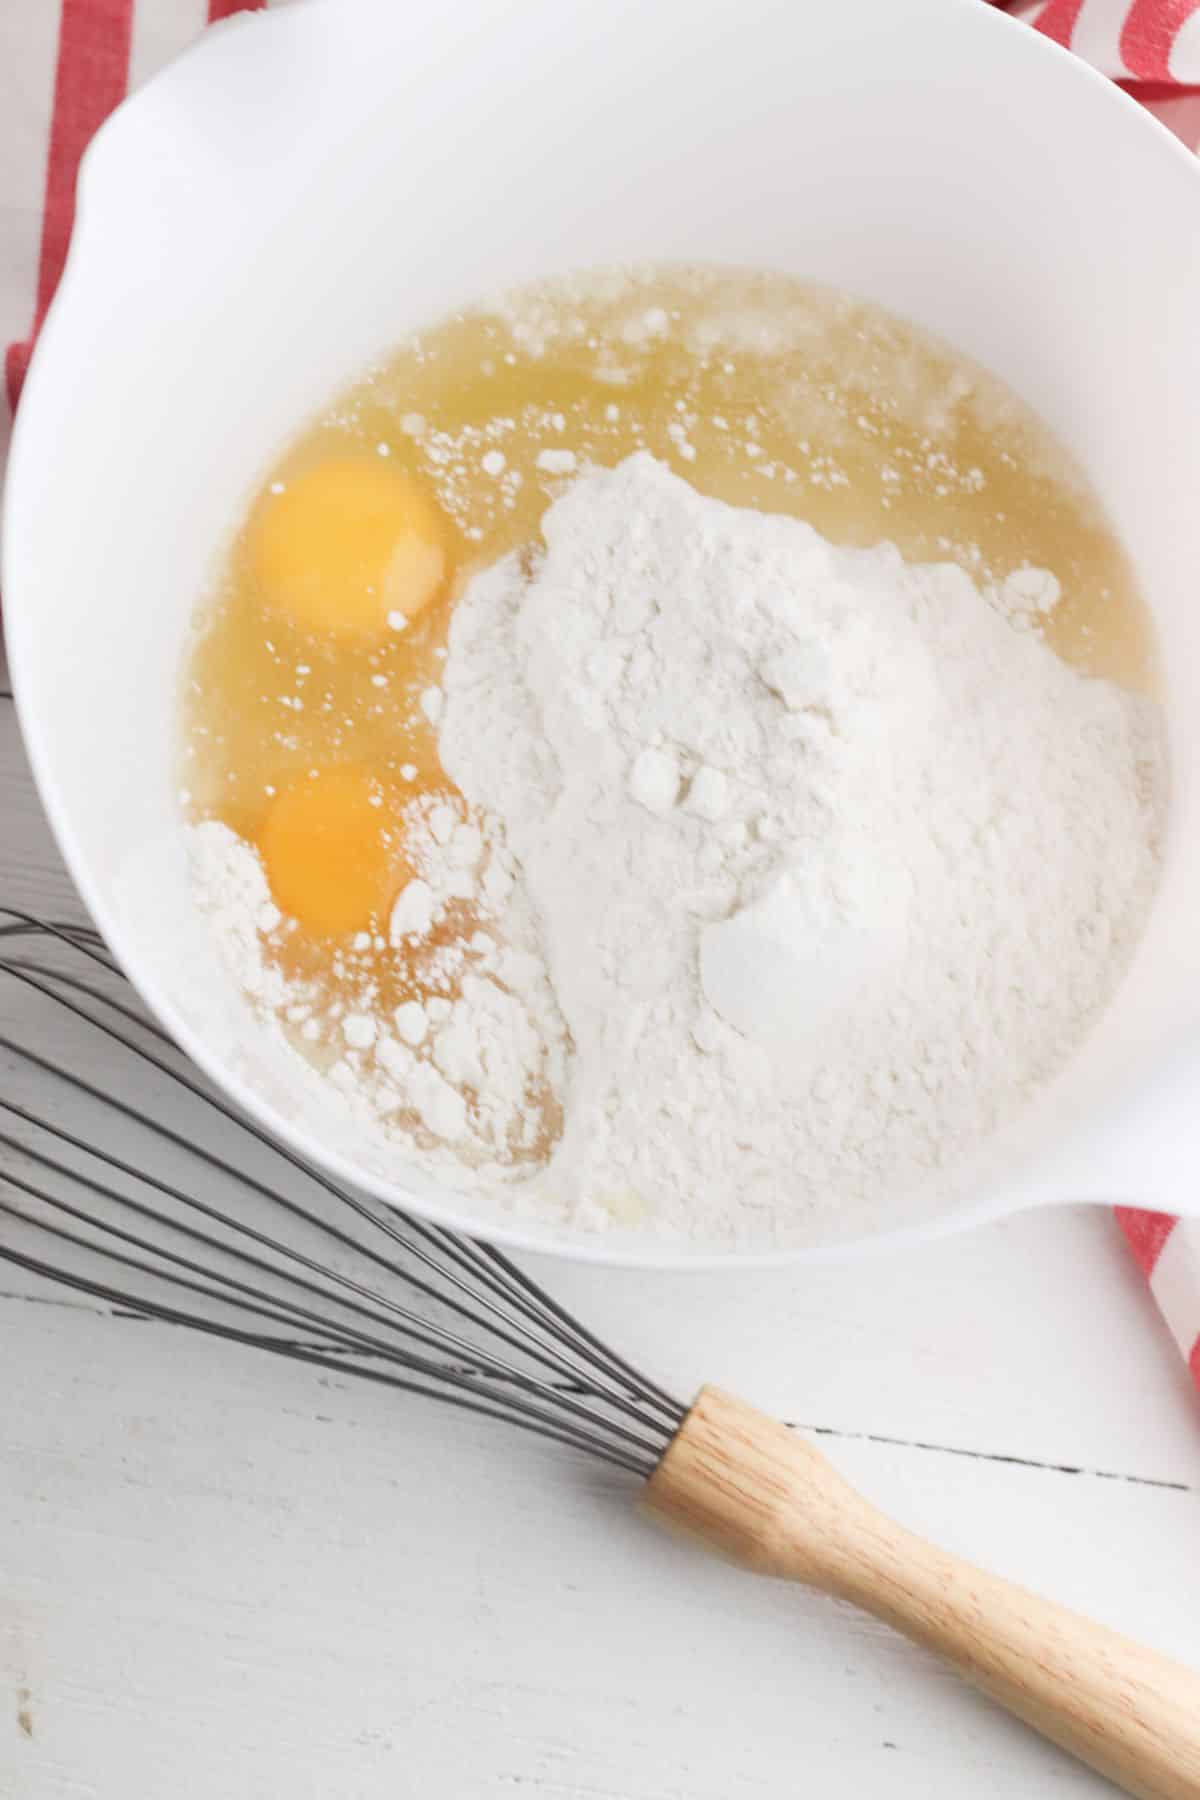 Cake mix, eggs, and vegetable oil in a mixing bowl.